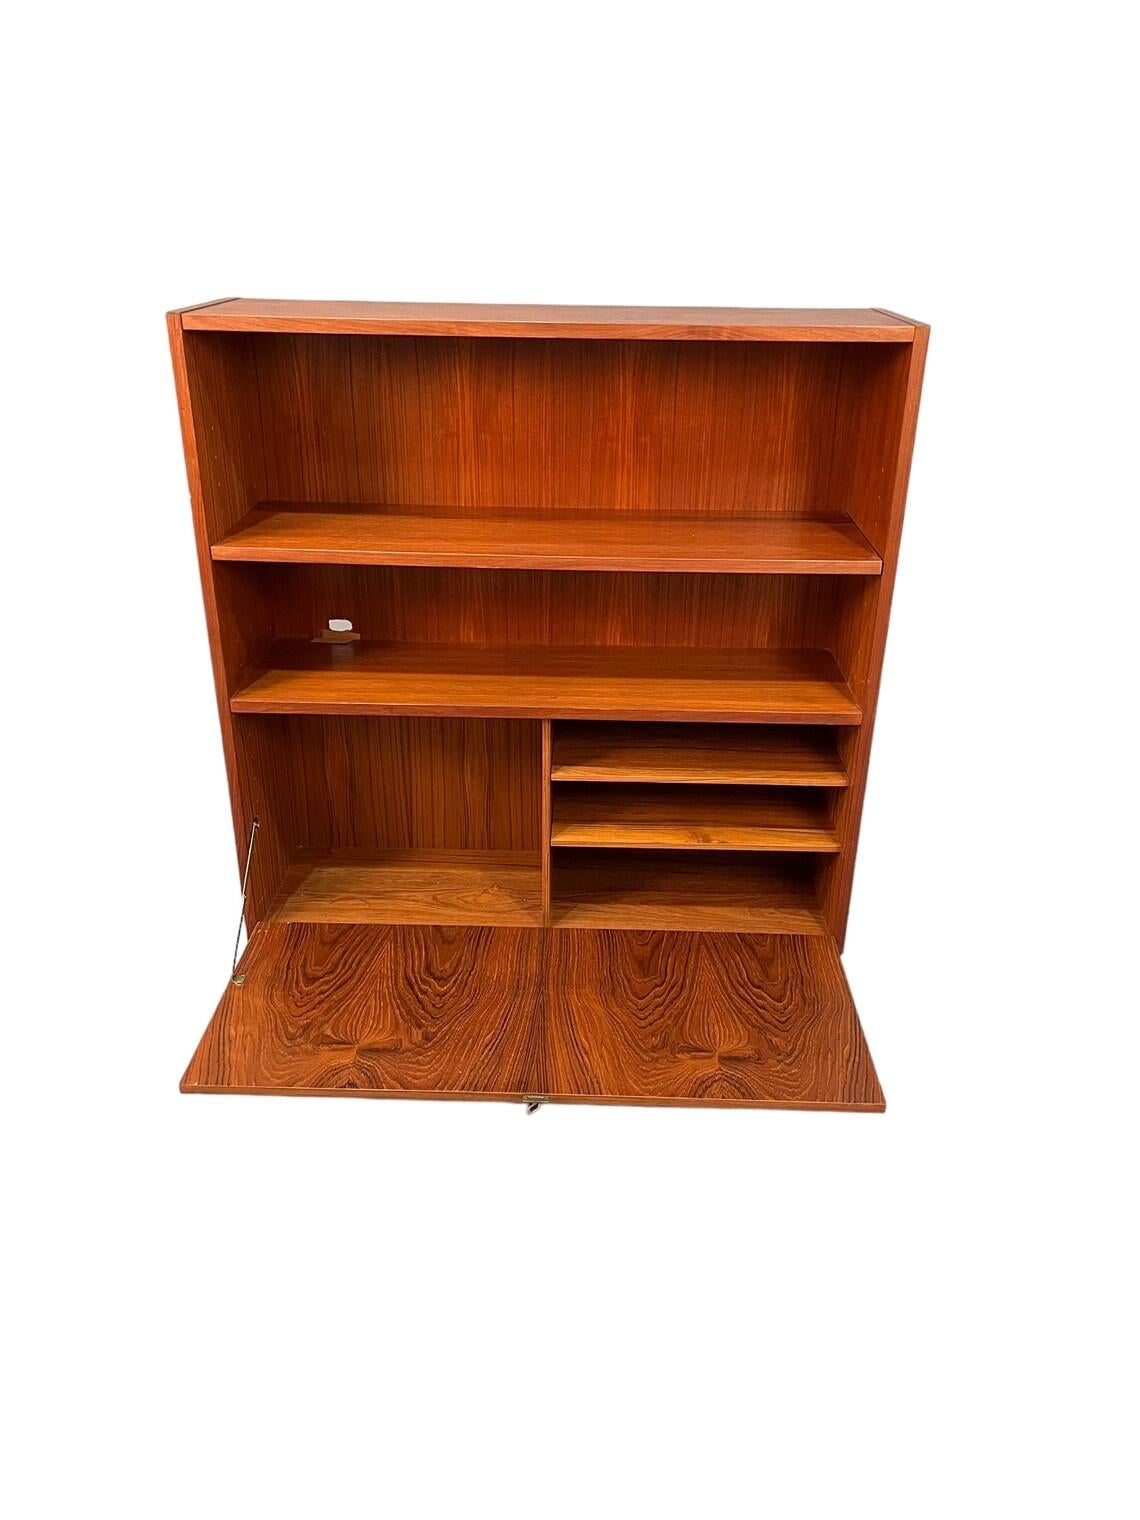 Mid Century teak danish bouquets with Storage in the bottom 1960s Circa the shelf are adjustable and removable. 
Dimensions W39 1/2 x D11 1/2 x H47 inches